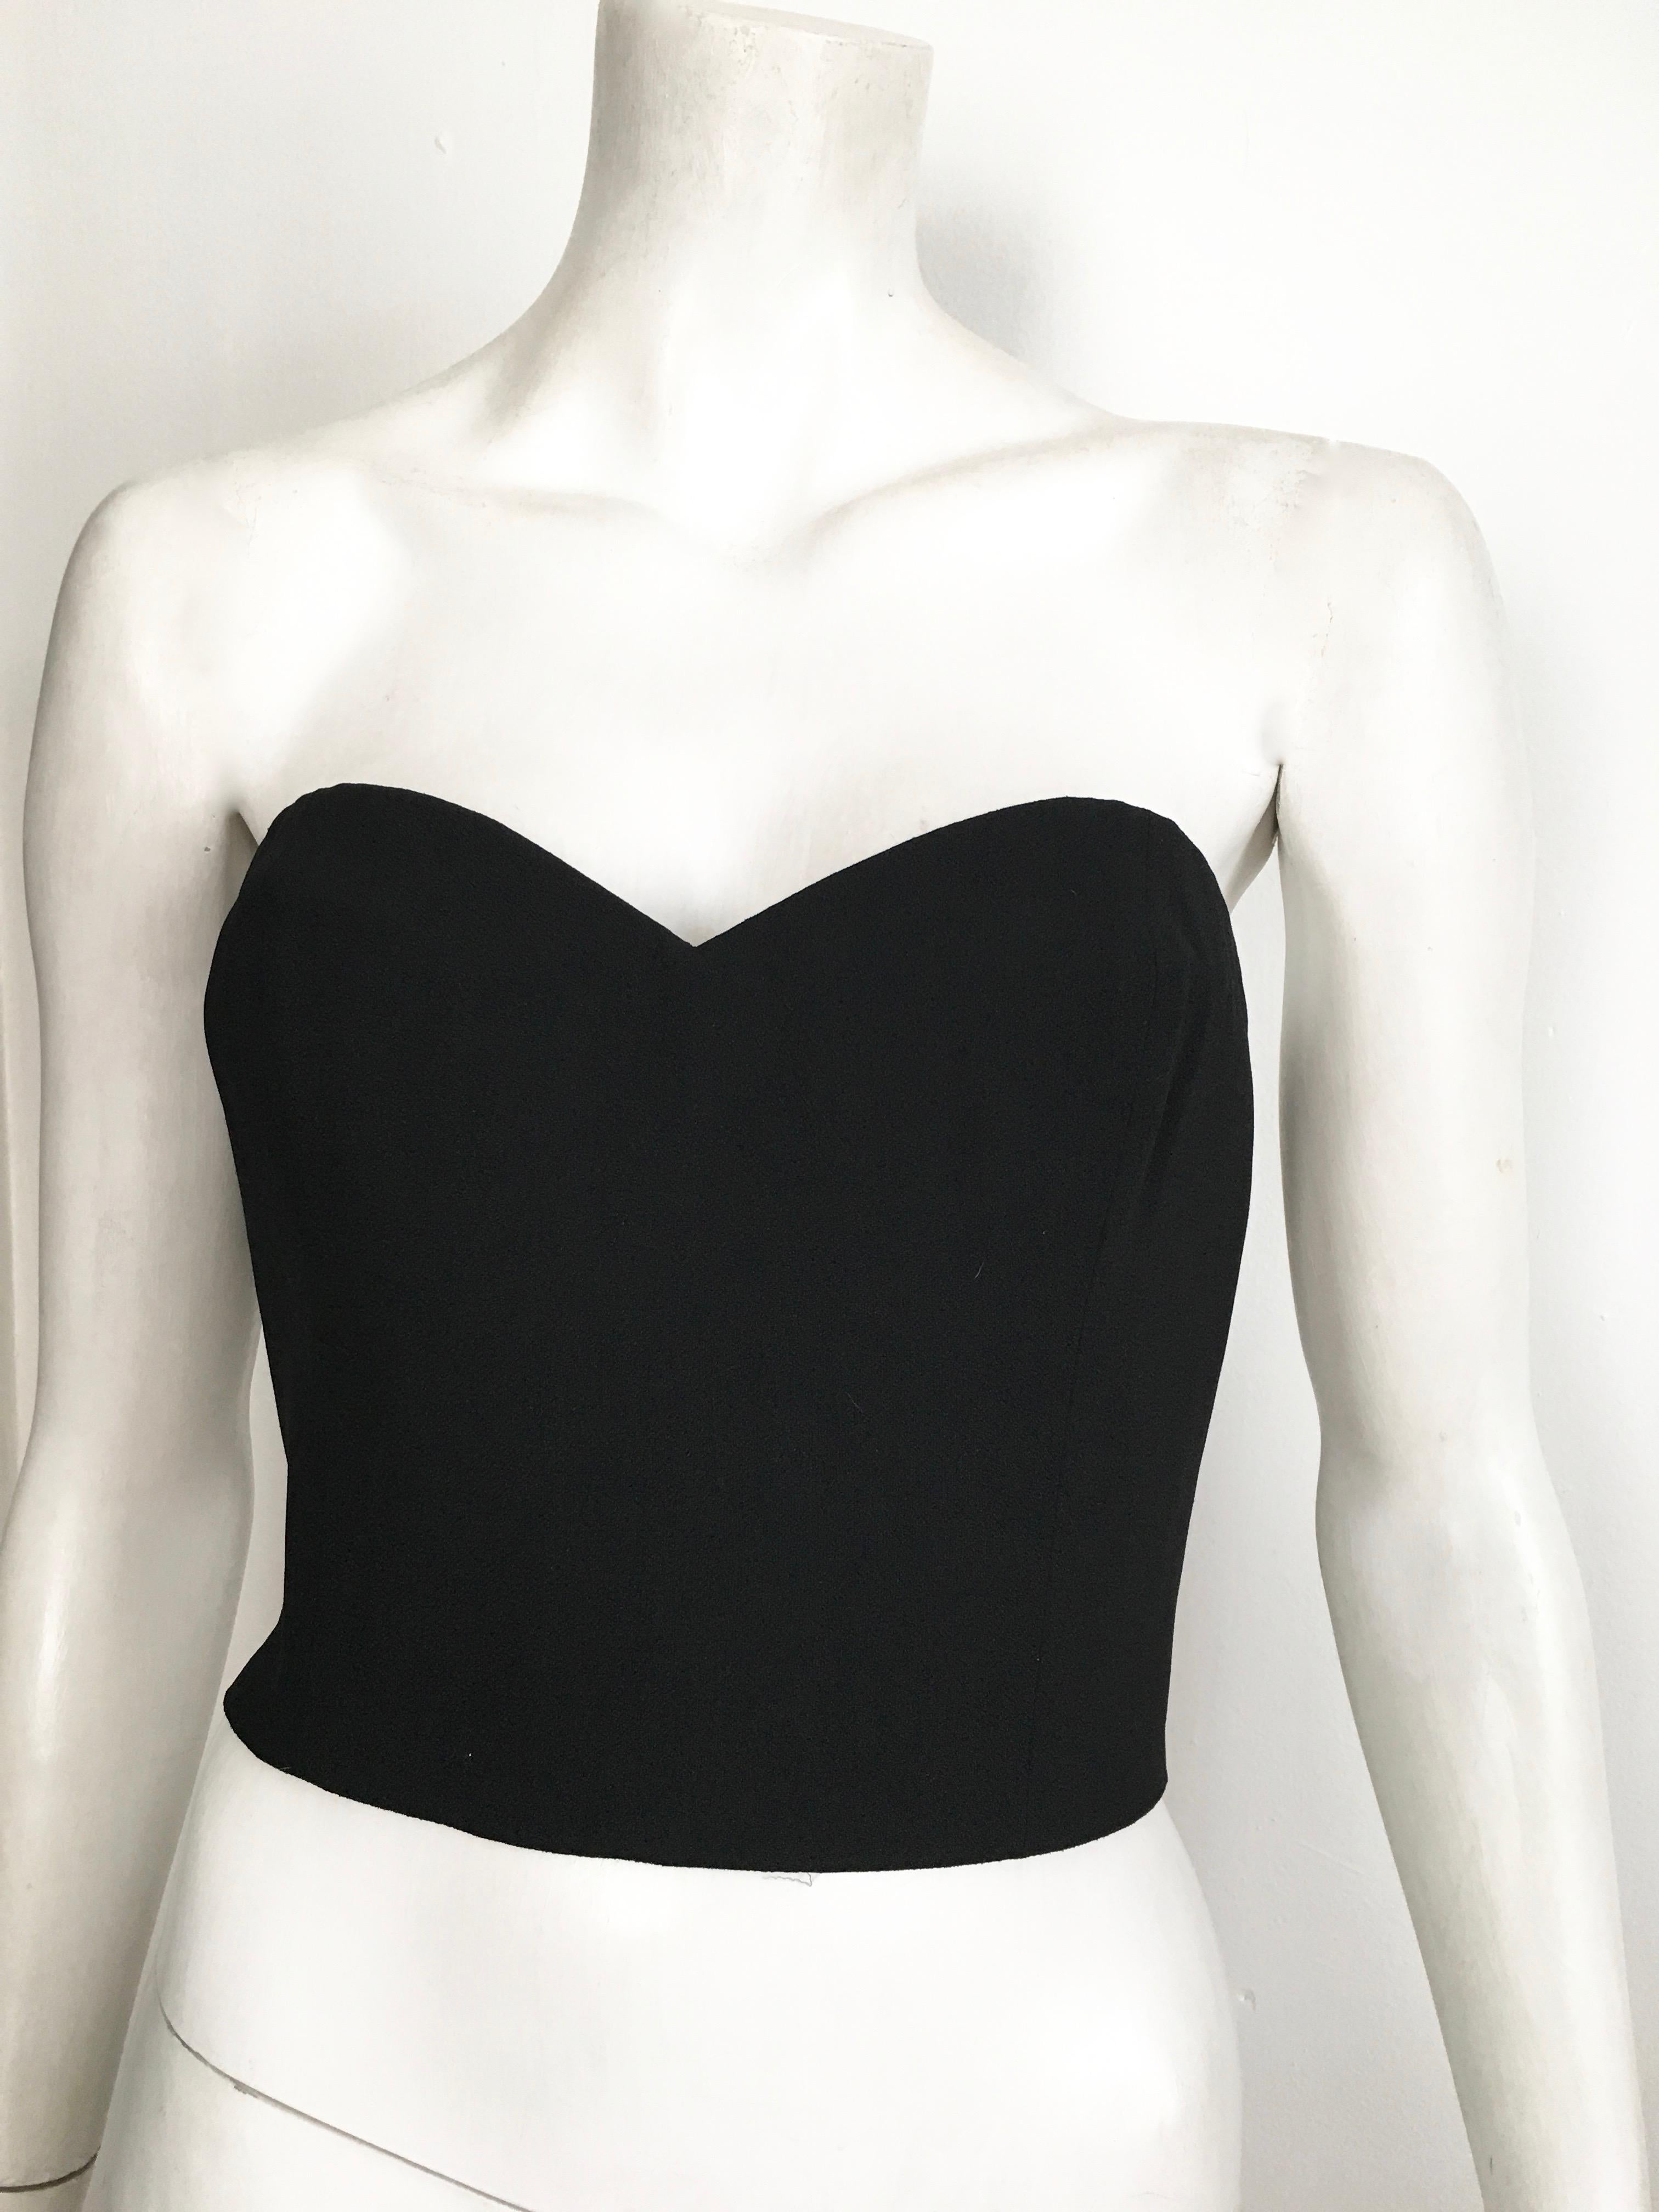 Sonia Rykiel 1980s black bustier is labeled a French size 42 and fits like an USA size 8.  
The waist on this bustier is 28. 1/2